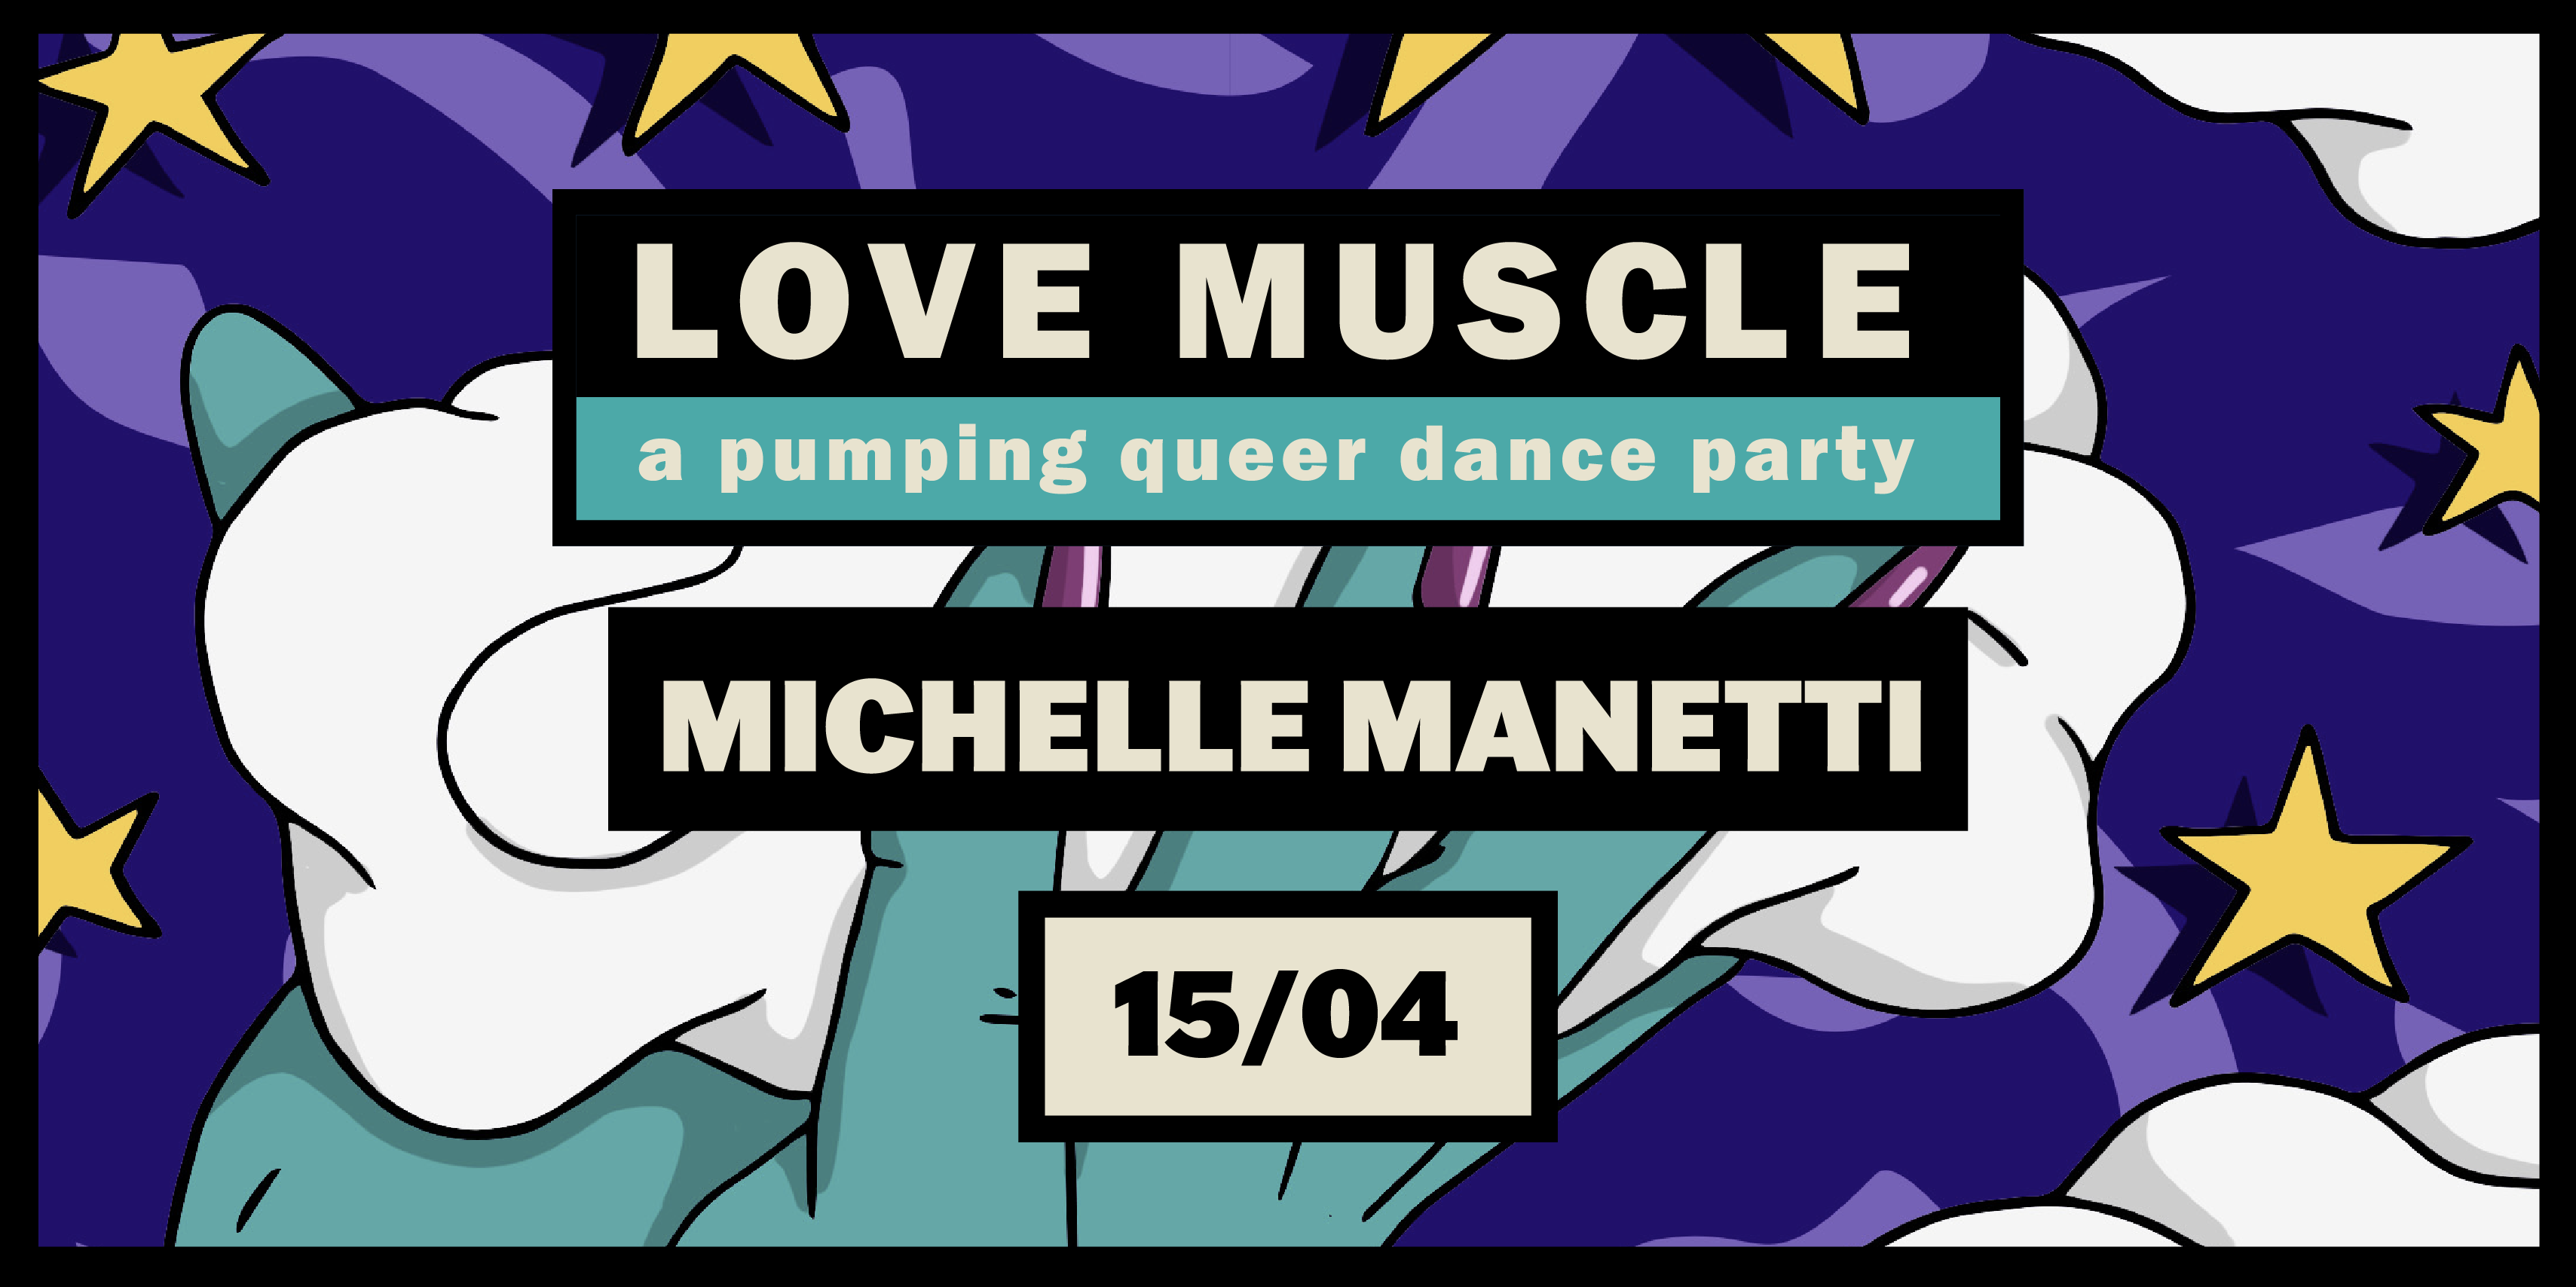 Love Muscle with Michelle Manetti - フライヤー表